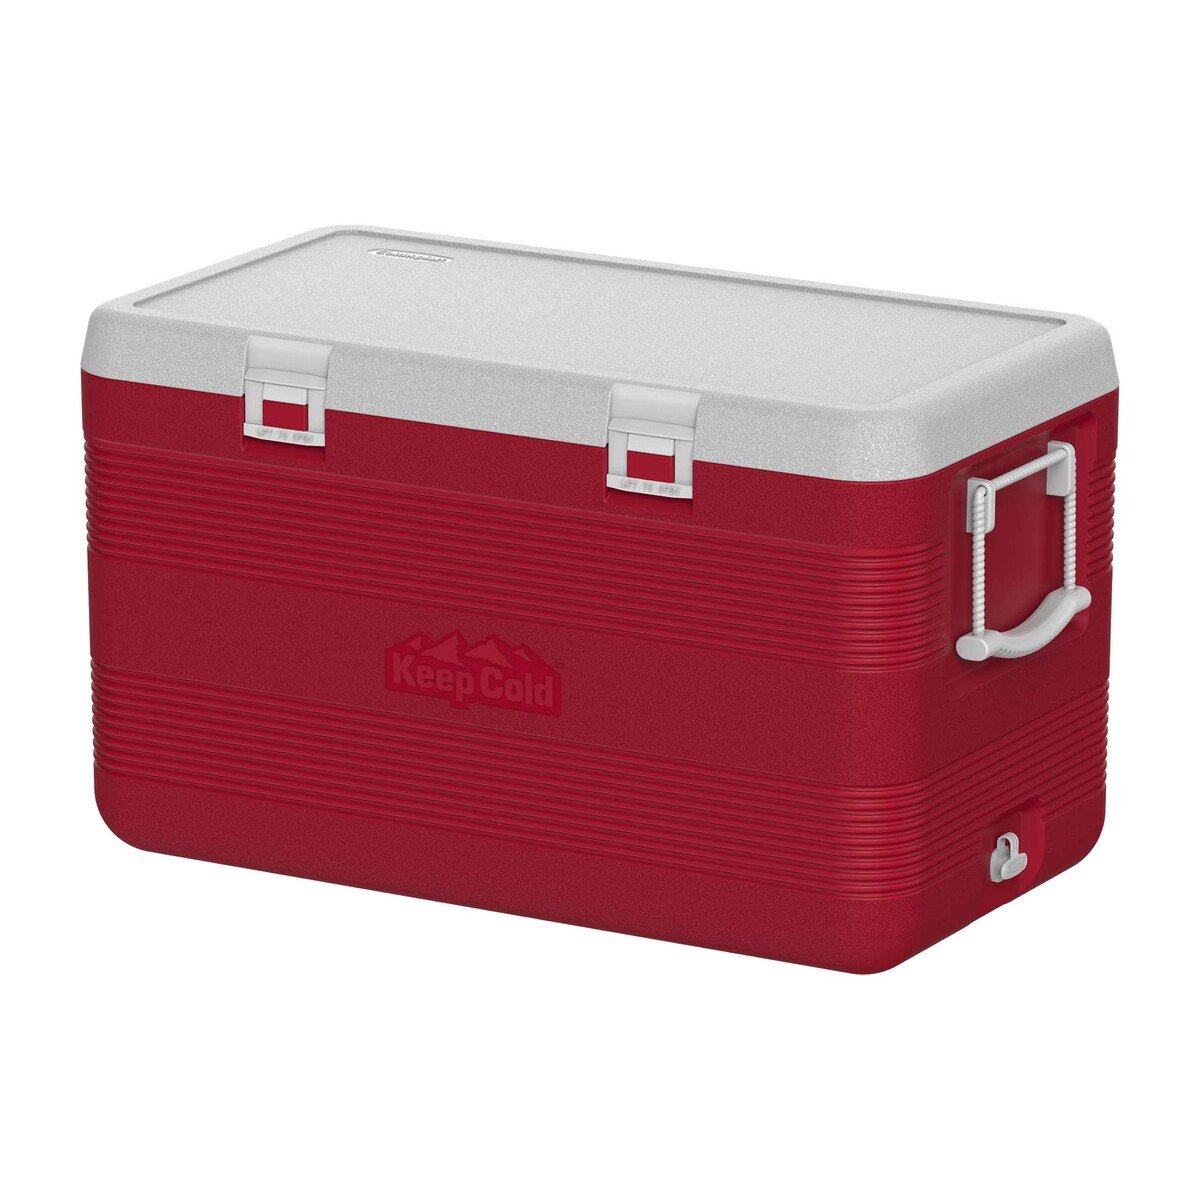 Keep Cold Deluxe Icebox MFIBXX020 127Ltr Assorted Color